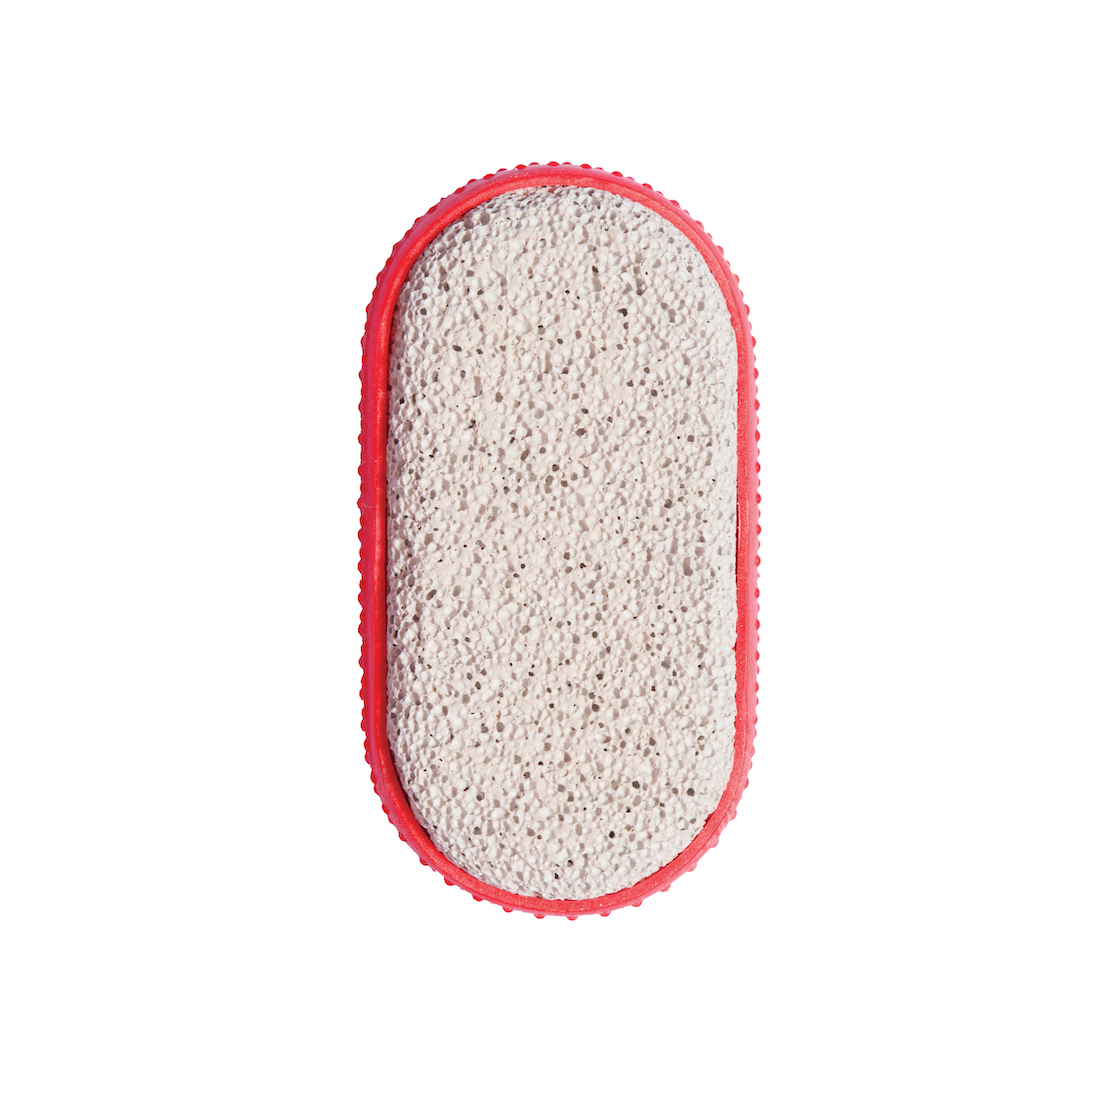 Pumice Stone With Rubber Grip